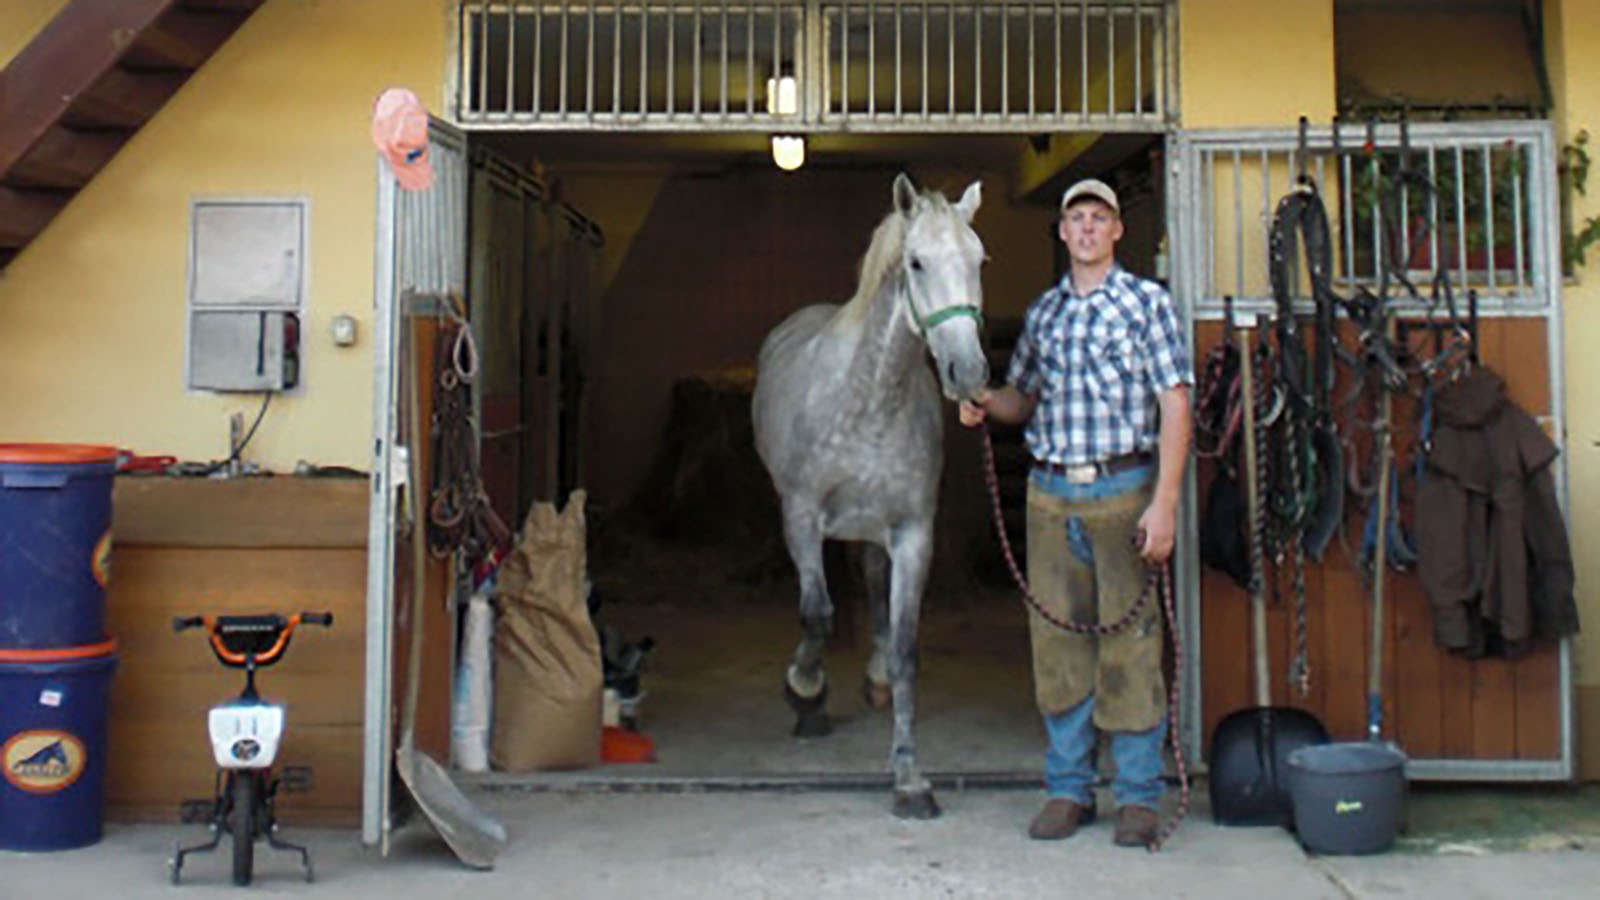 Clay Schafer has traveled the world shoeing horses, from Austria to Arizona.